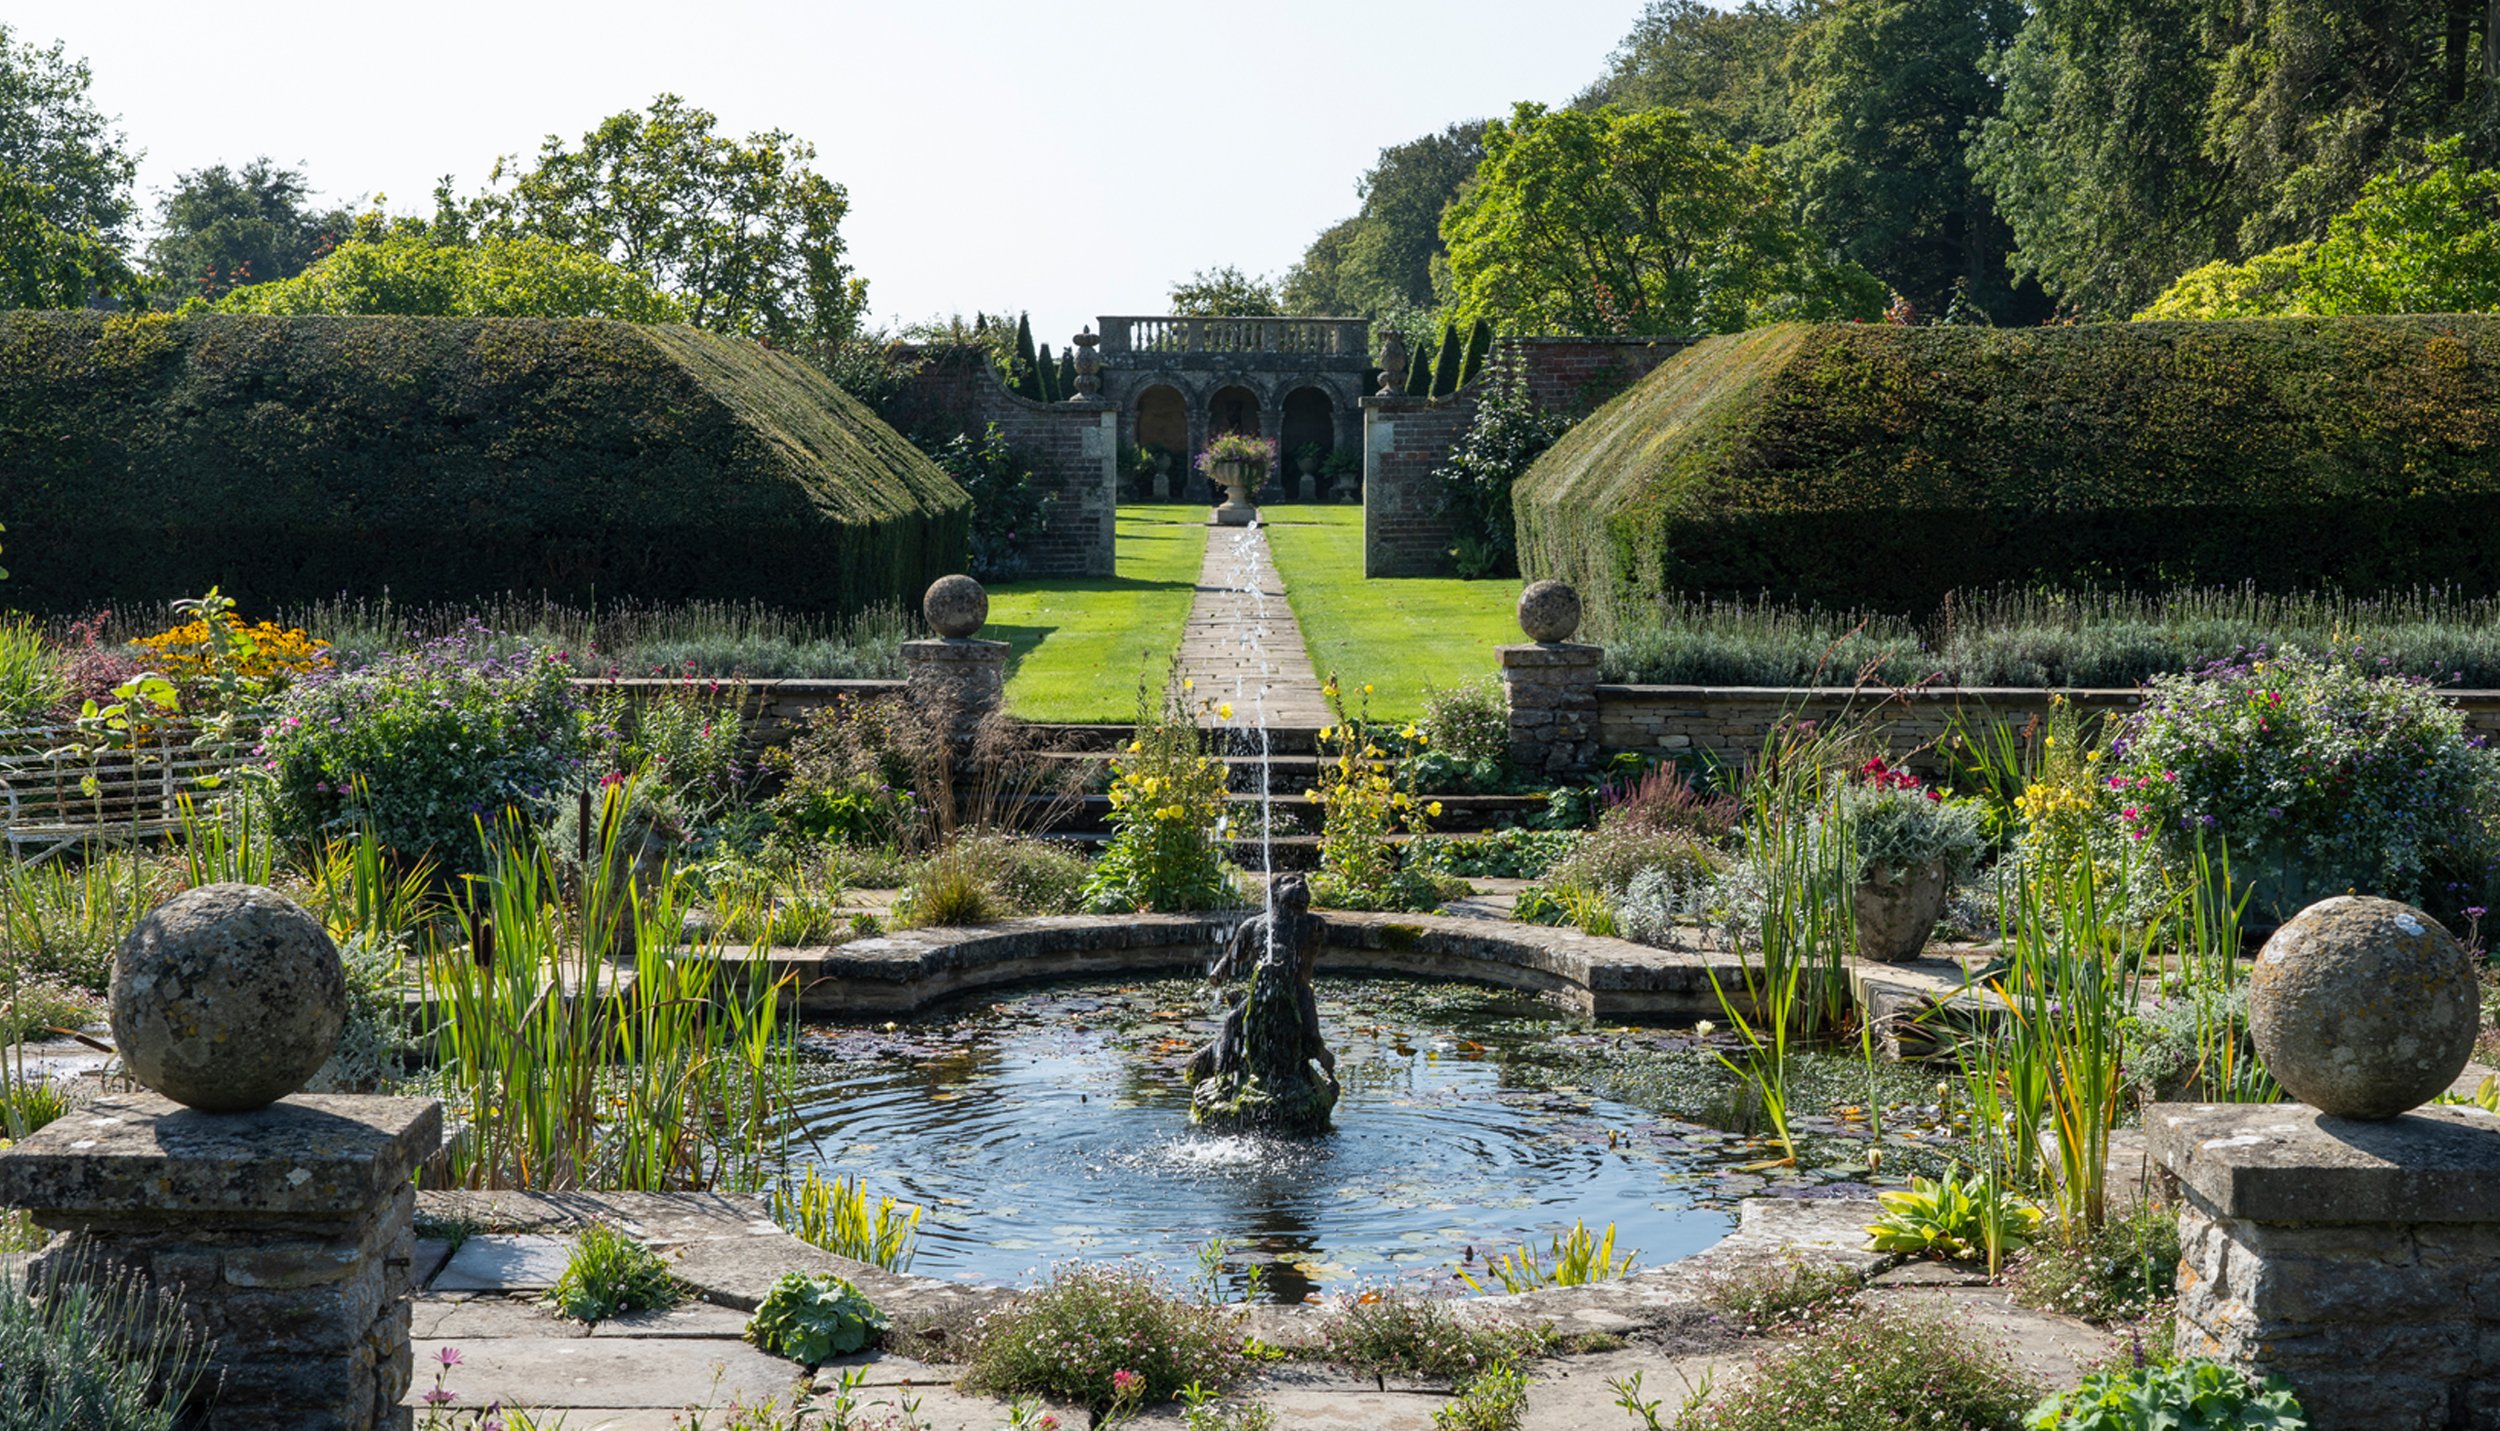 Francis+York+Country House in the Cotswolds with Famous Formal Gardens 00029.jpg